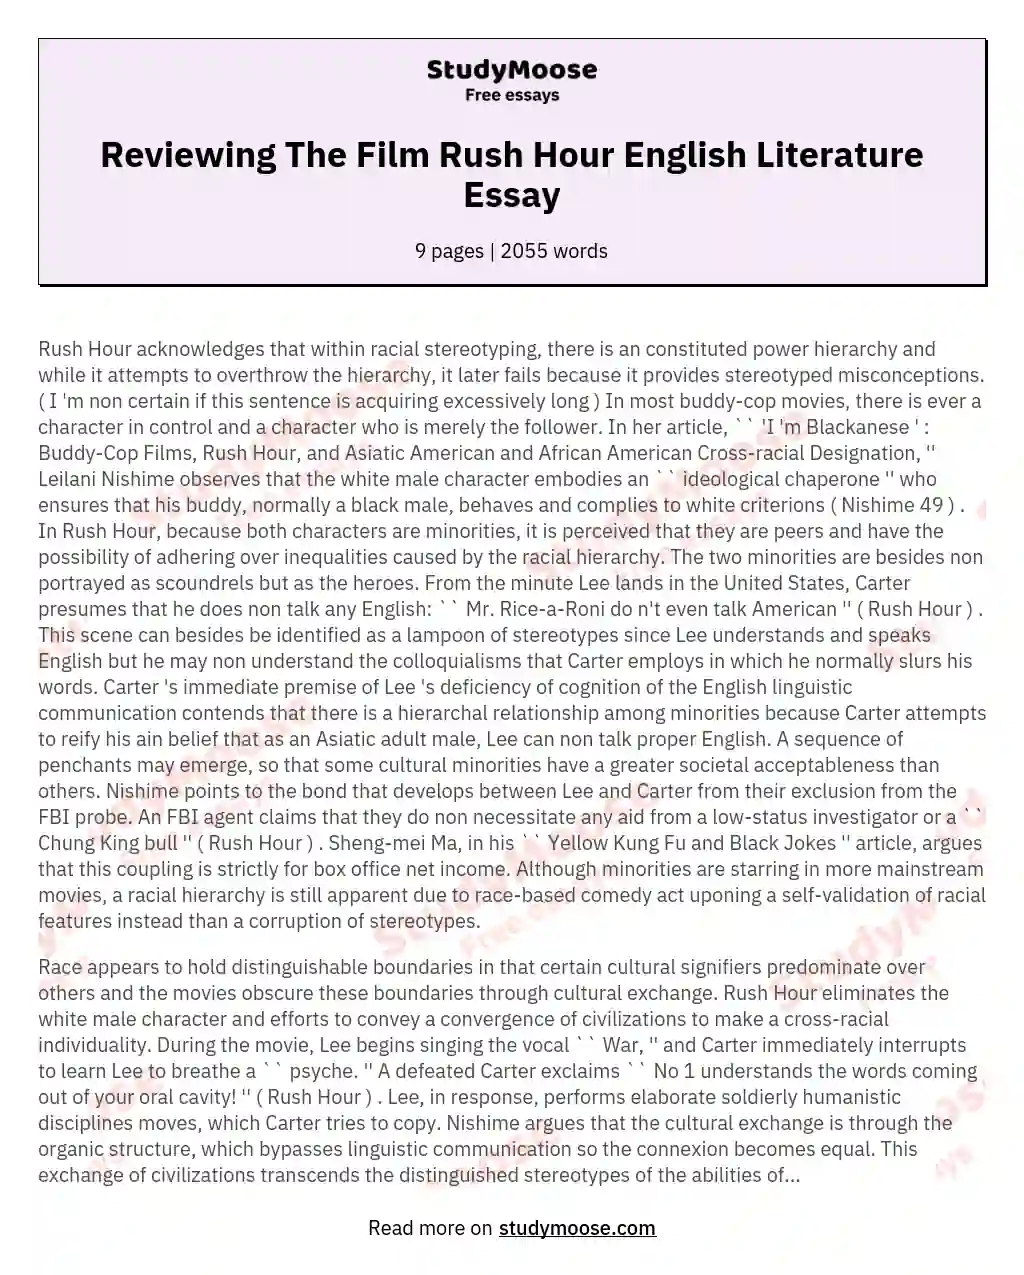 Reviewing The Film Rush Hour English Literature Essay essay